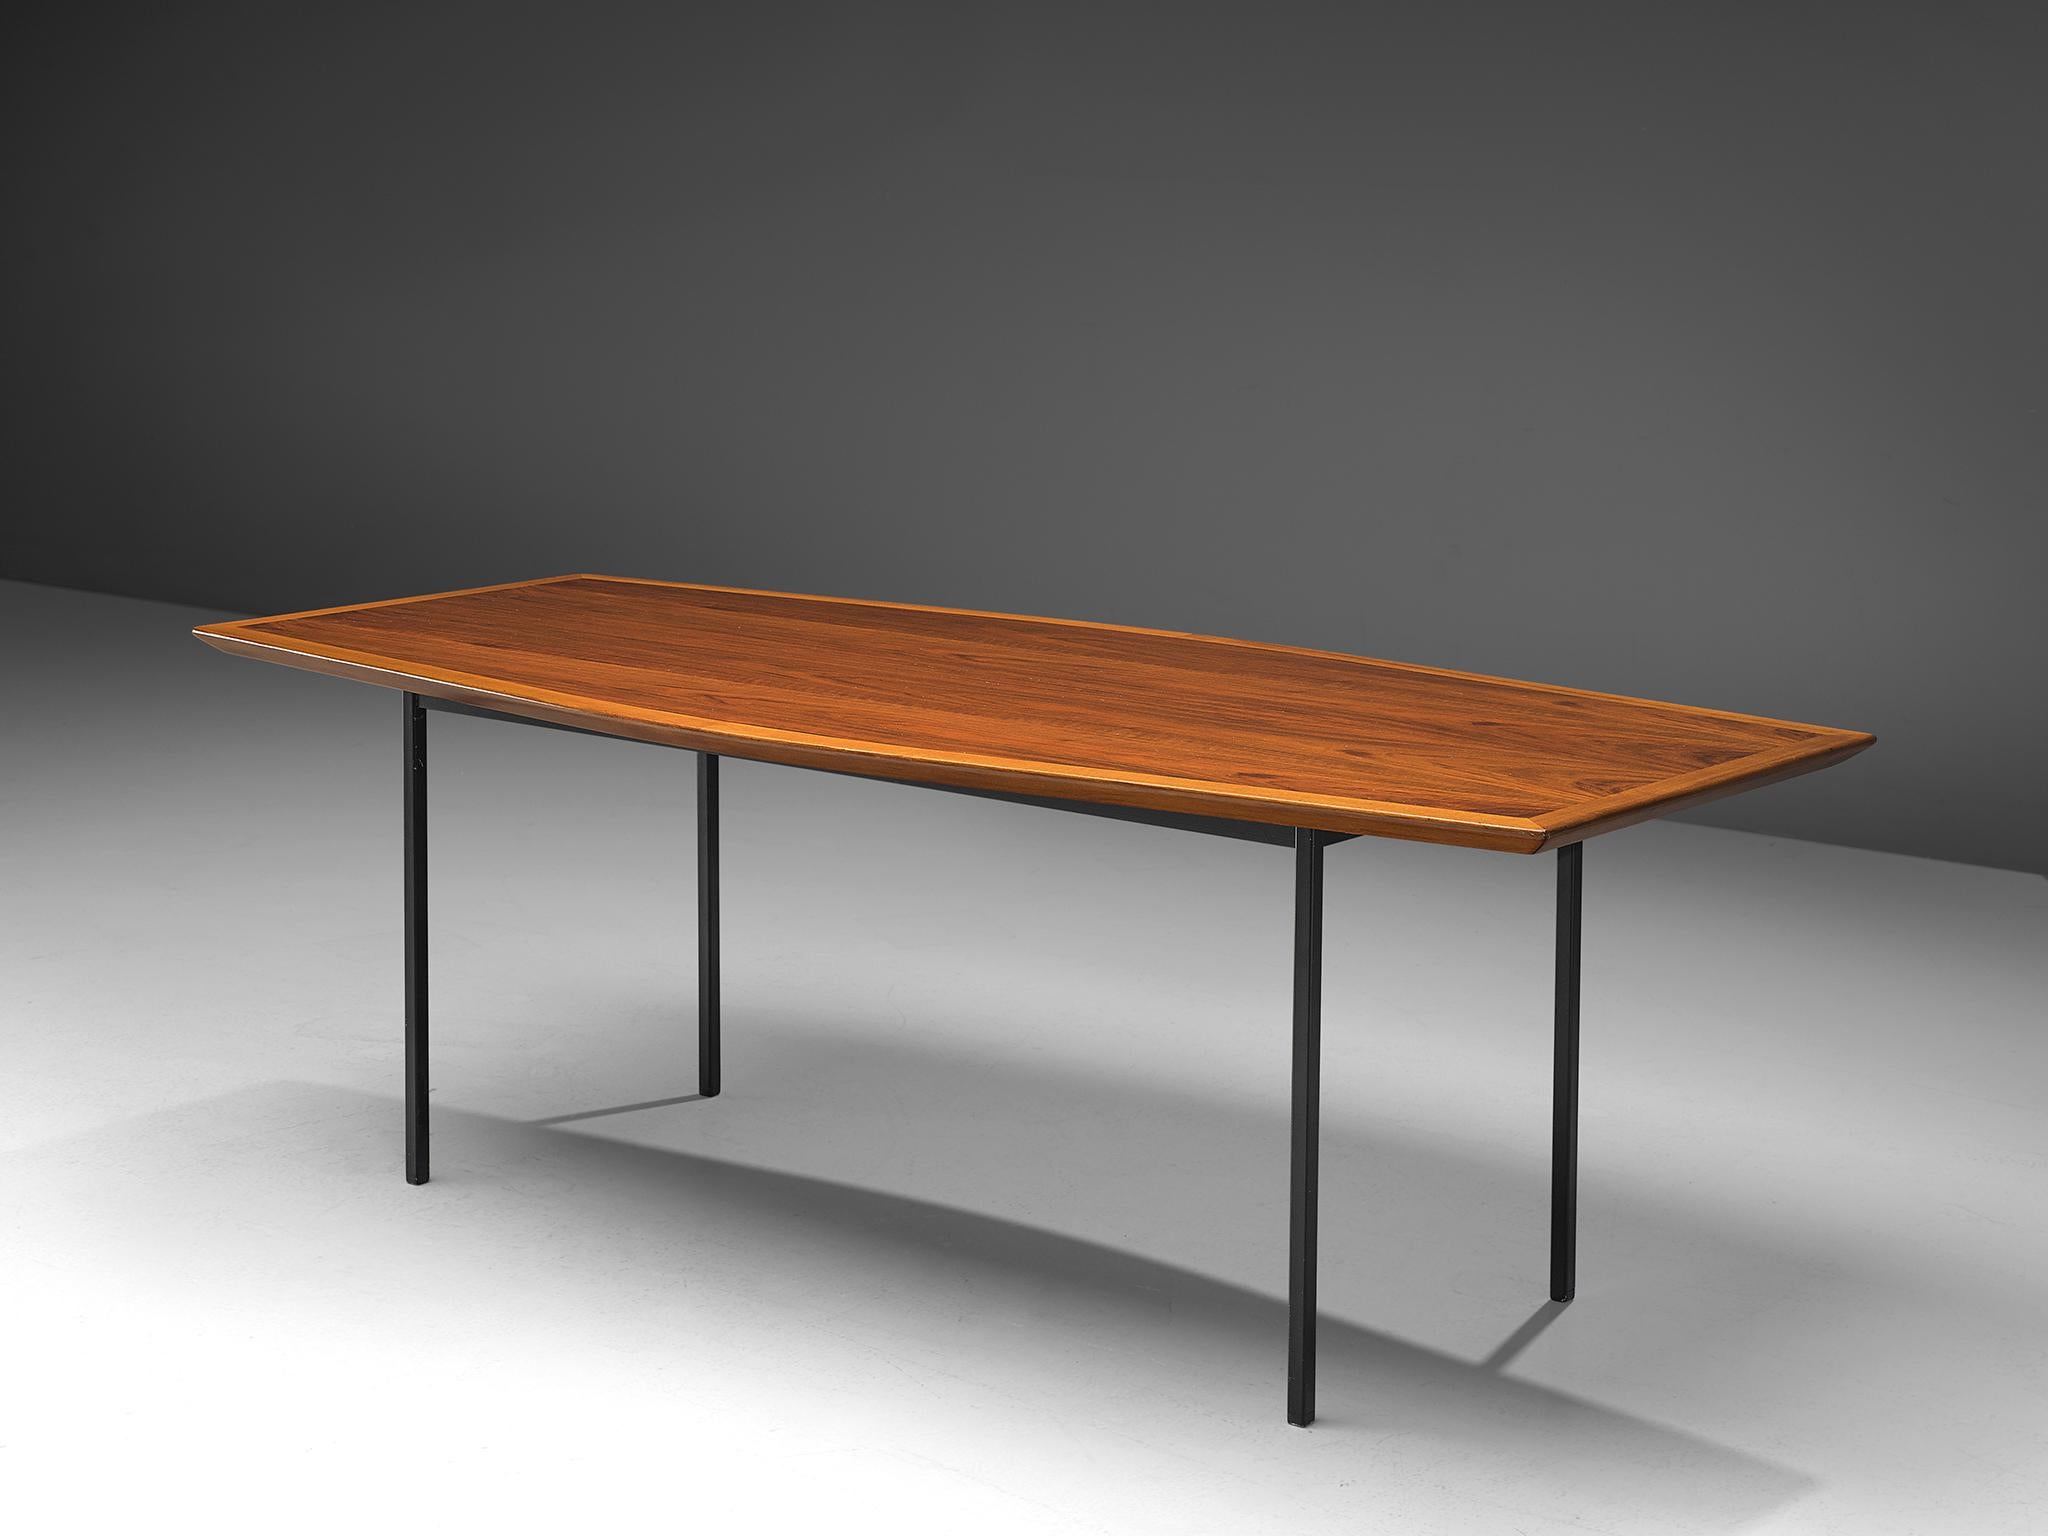 Knoll International, walnut, metal, table model 580, United States, 1958-1976.

Large dining table with boat shaped top in walnut. The table can seat 8 people. The table has four circular legs. The tabletop features a bevelled, edge, made of a